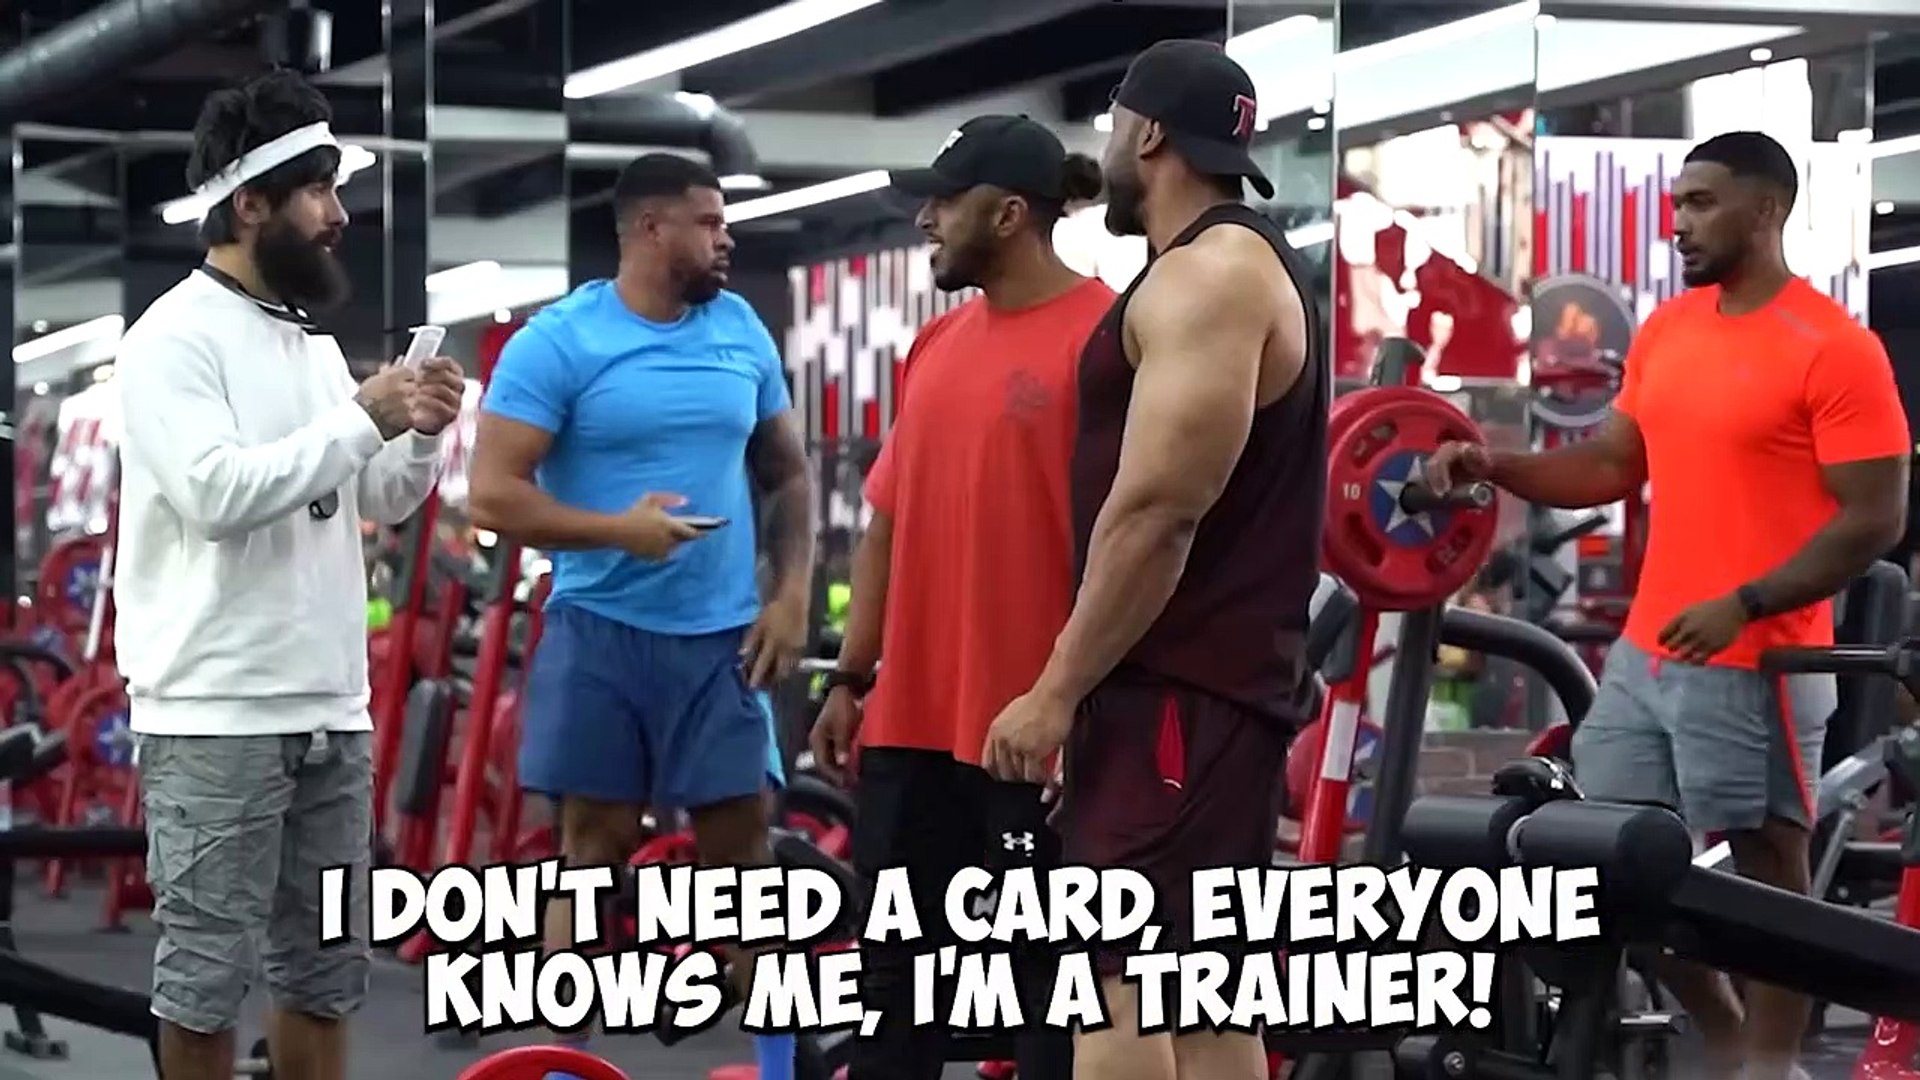 Elite Powerlifter Pretended to be a FAKE TRAINER #2